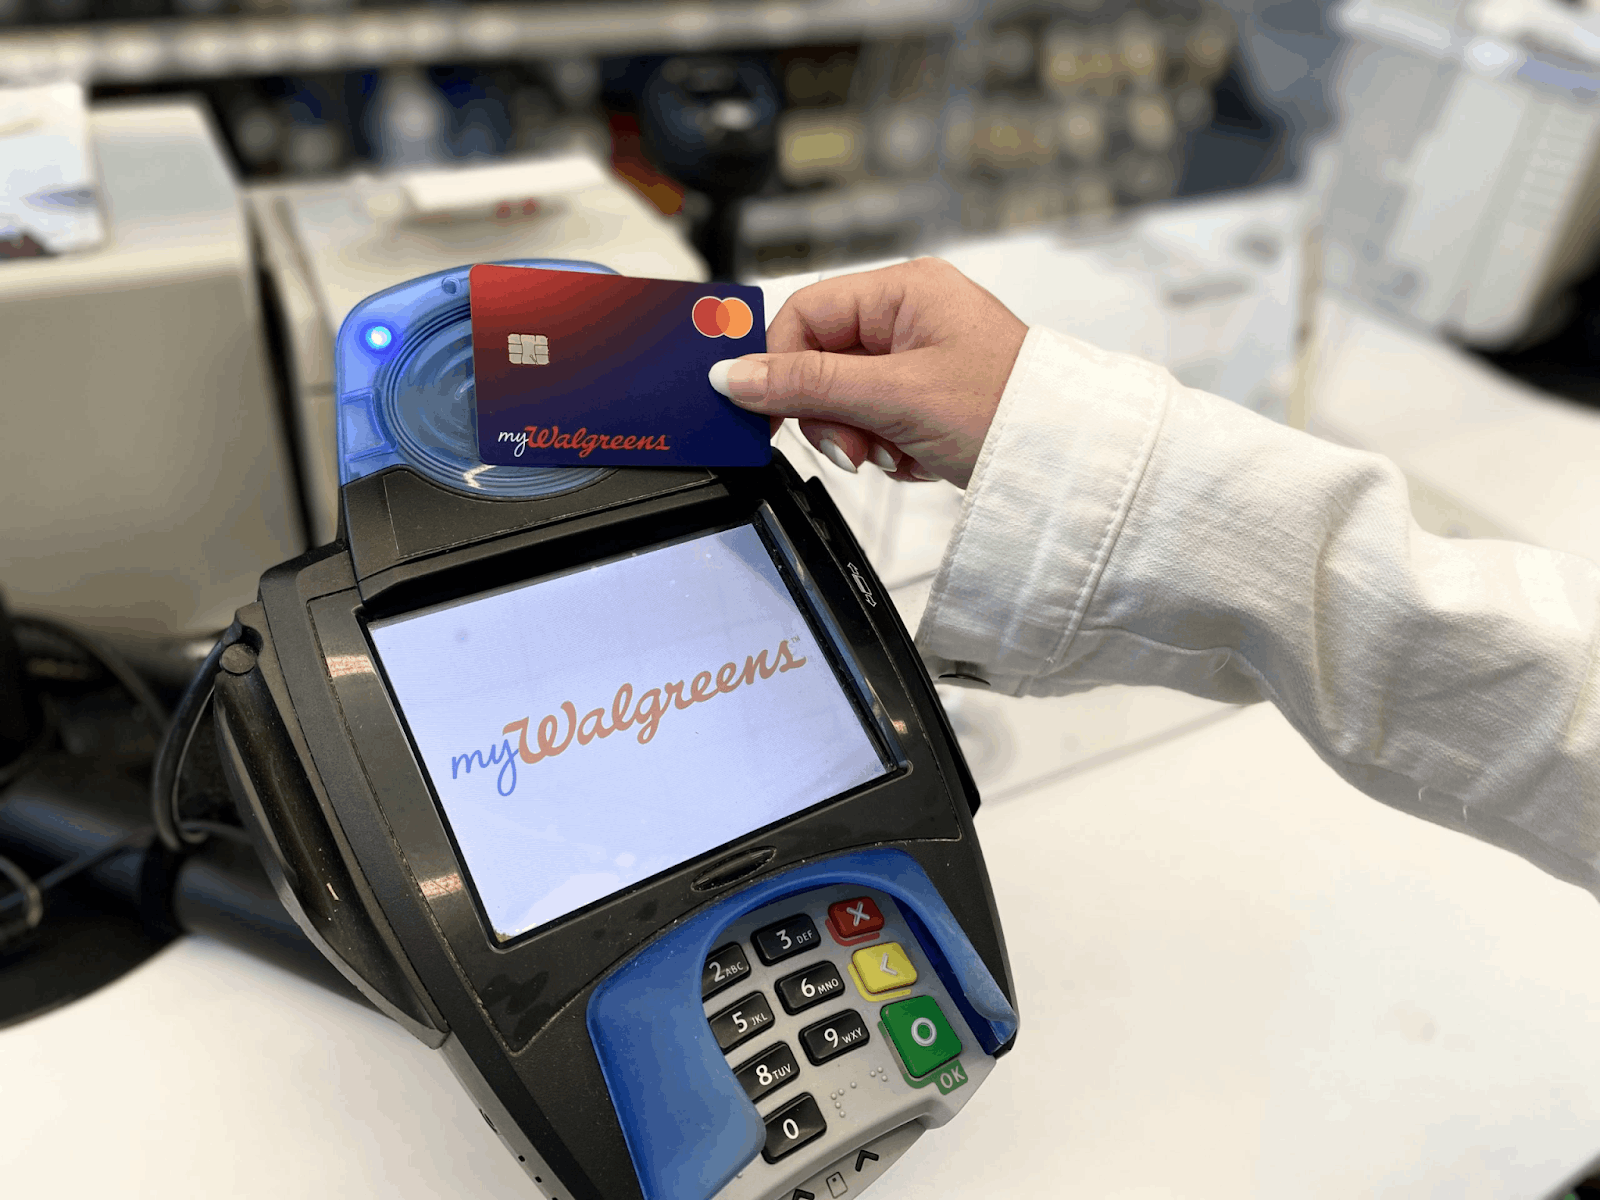 myWalgreens Credit Card - How to Apply Online